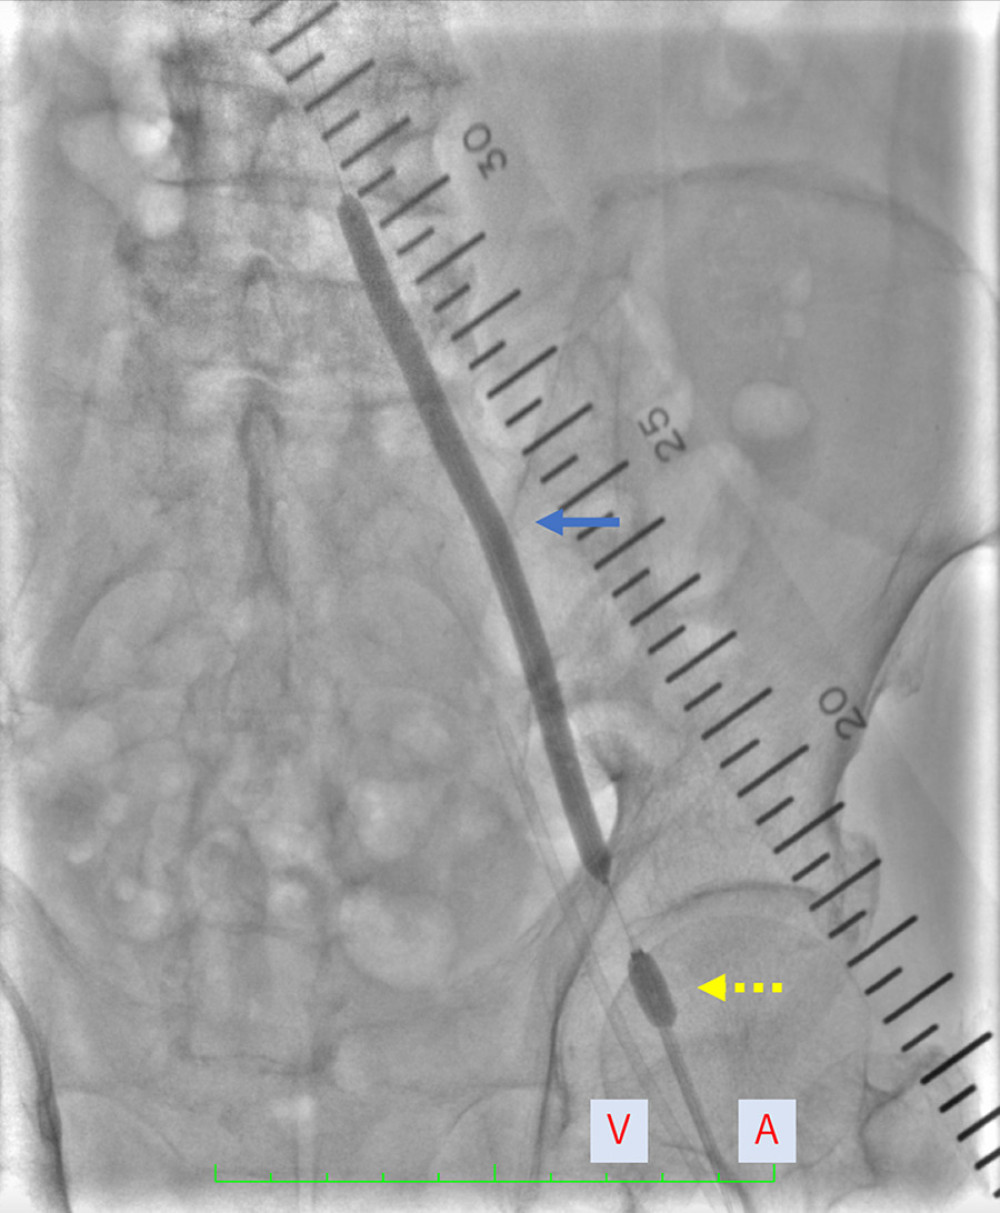 Intraoperative angiography image obtained during iliac artery endovascular recanalization to open the left iliac artery. Ballooning (solid arrow) with a 9-Fr Optimo catheter (dashed arrow; A – artery, V – vein).